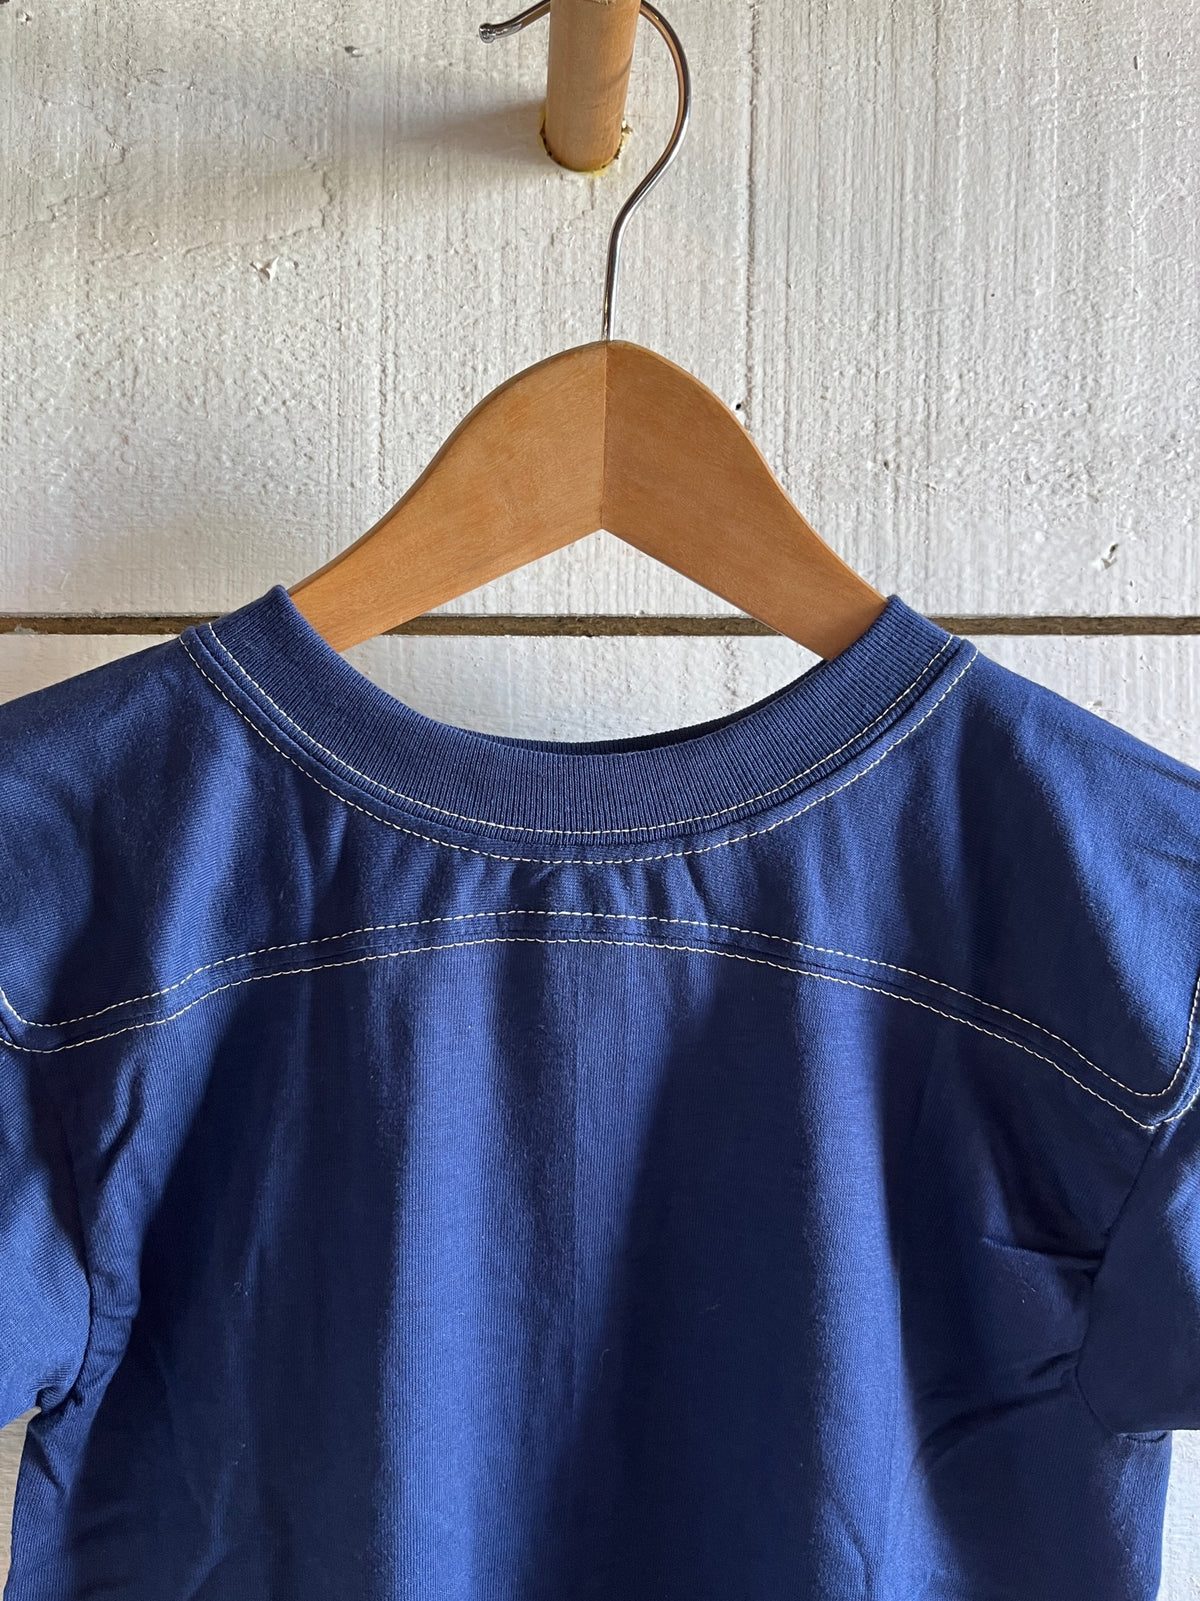 1980s Deadstock Youth Tees - Single Stitch